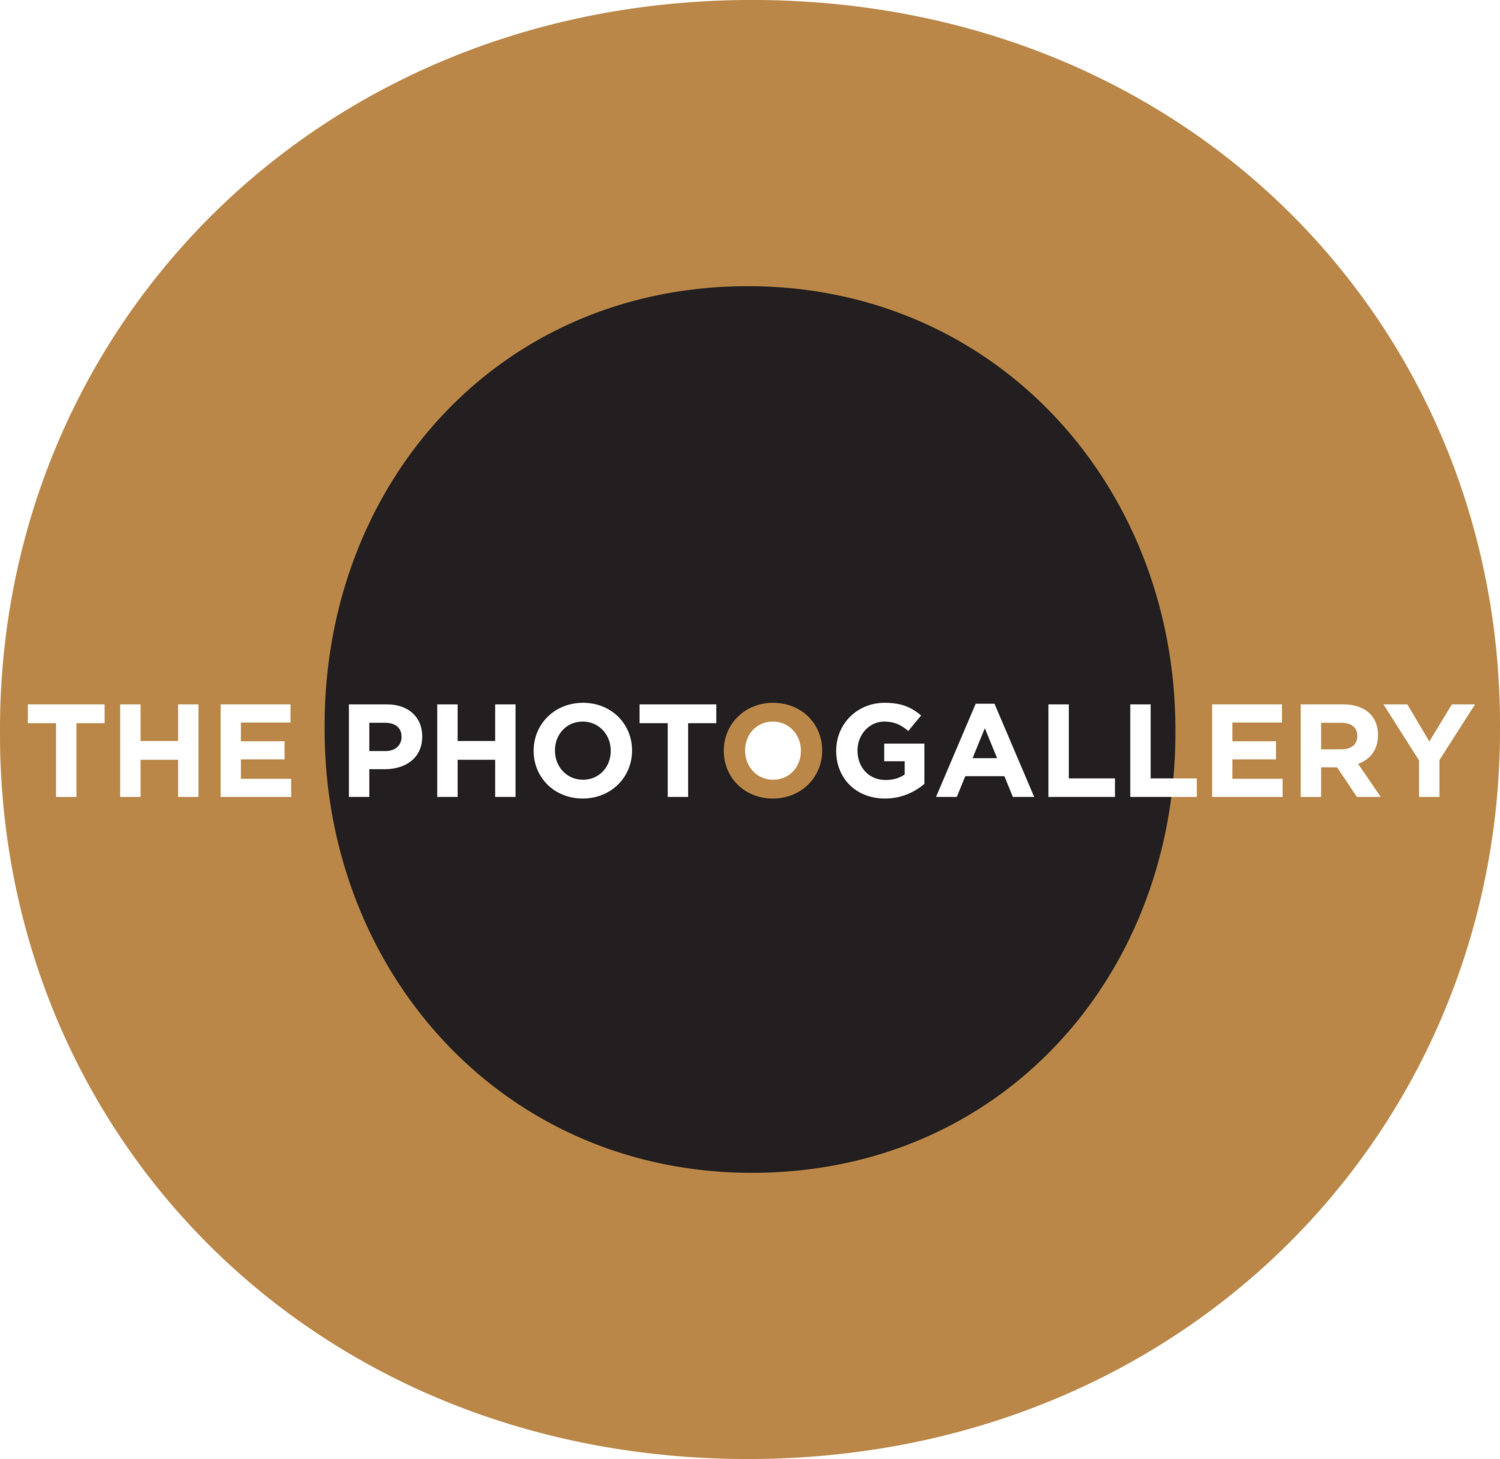 THE PHOTOGALLERY